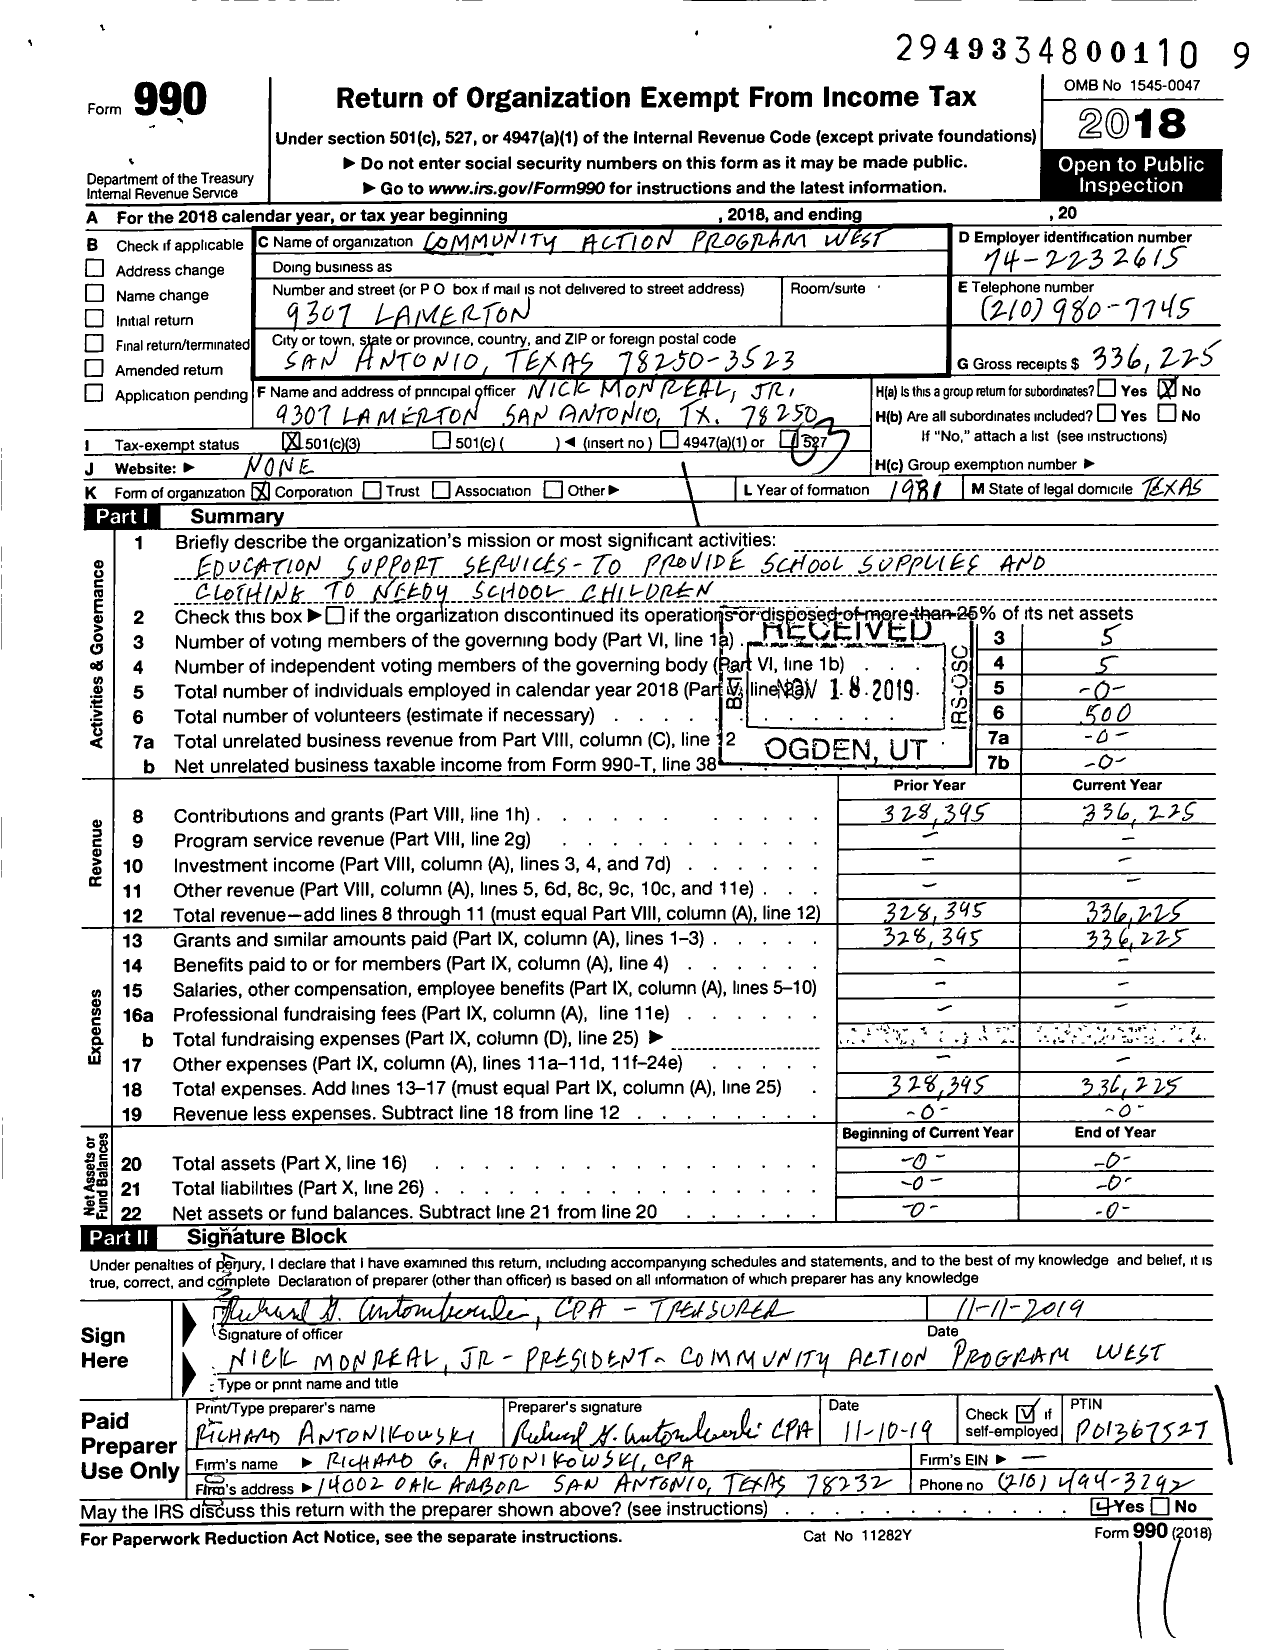 Image of first page of 2018 Form 990 for Community Action Program West